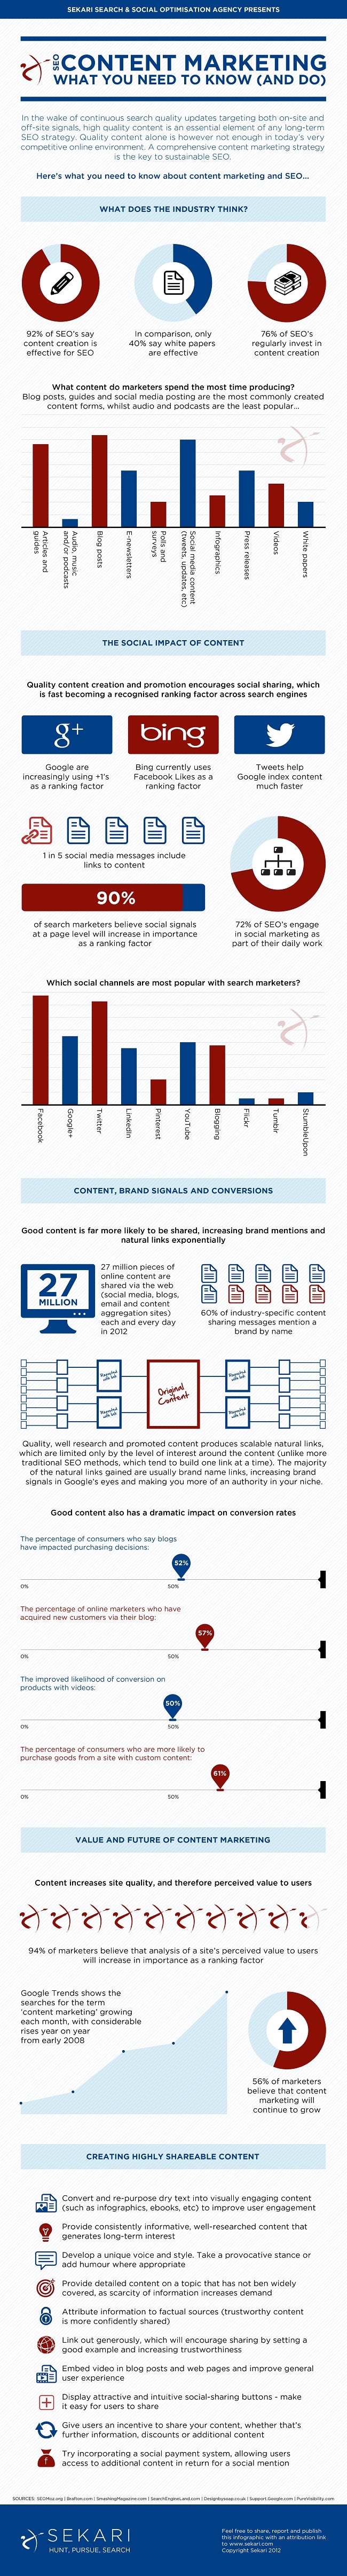 content-marketing-seo-strategy-infographic